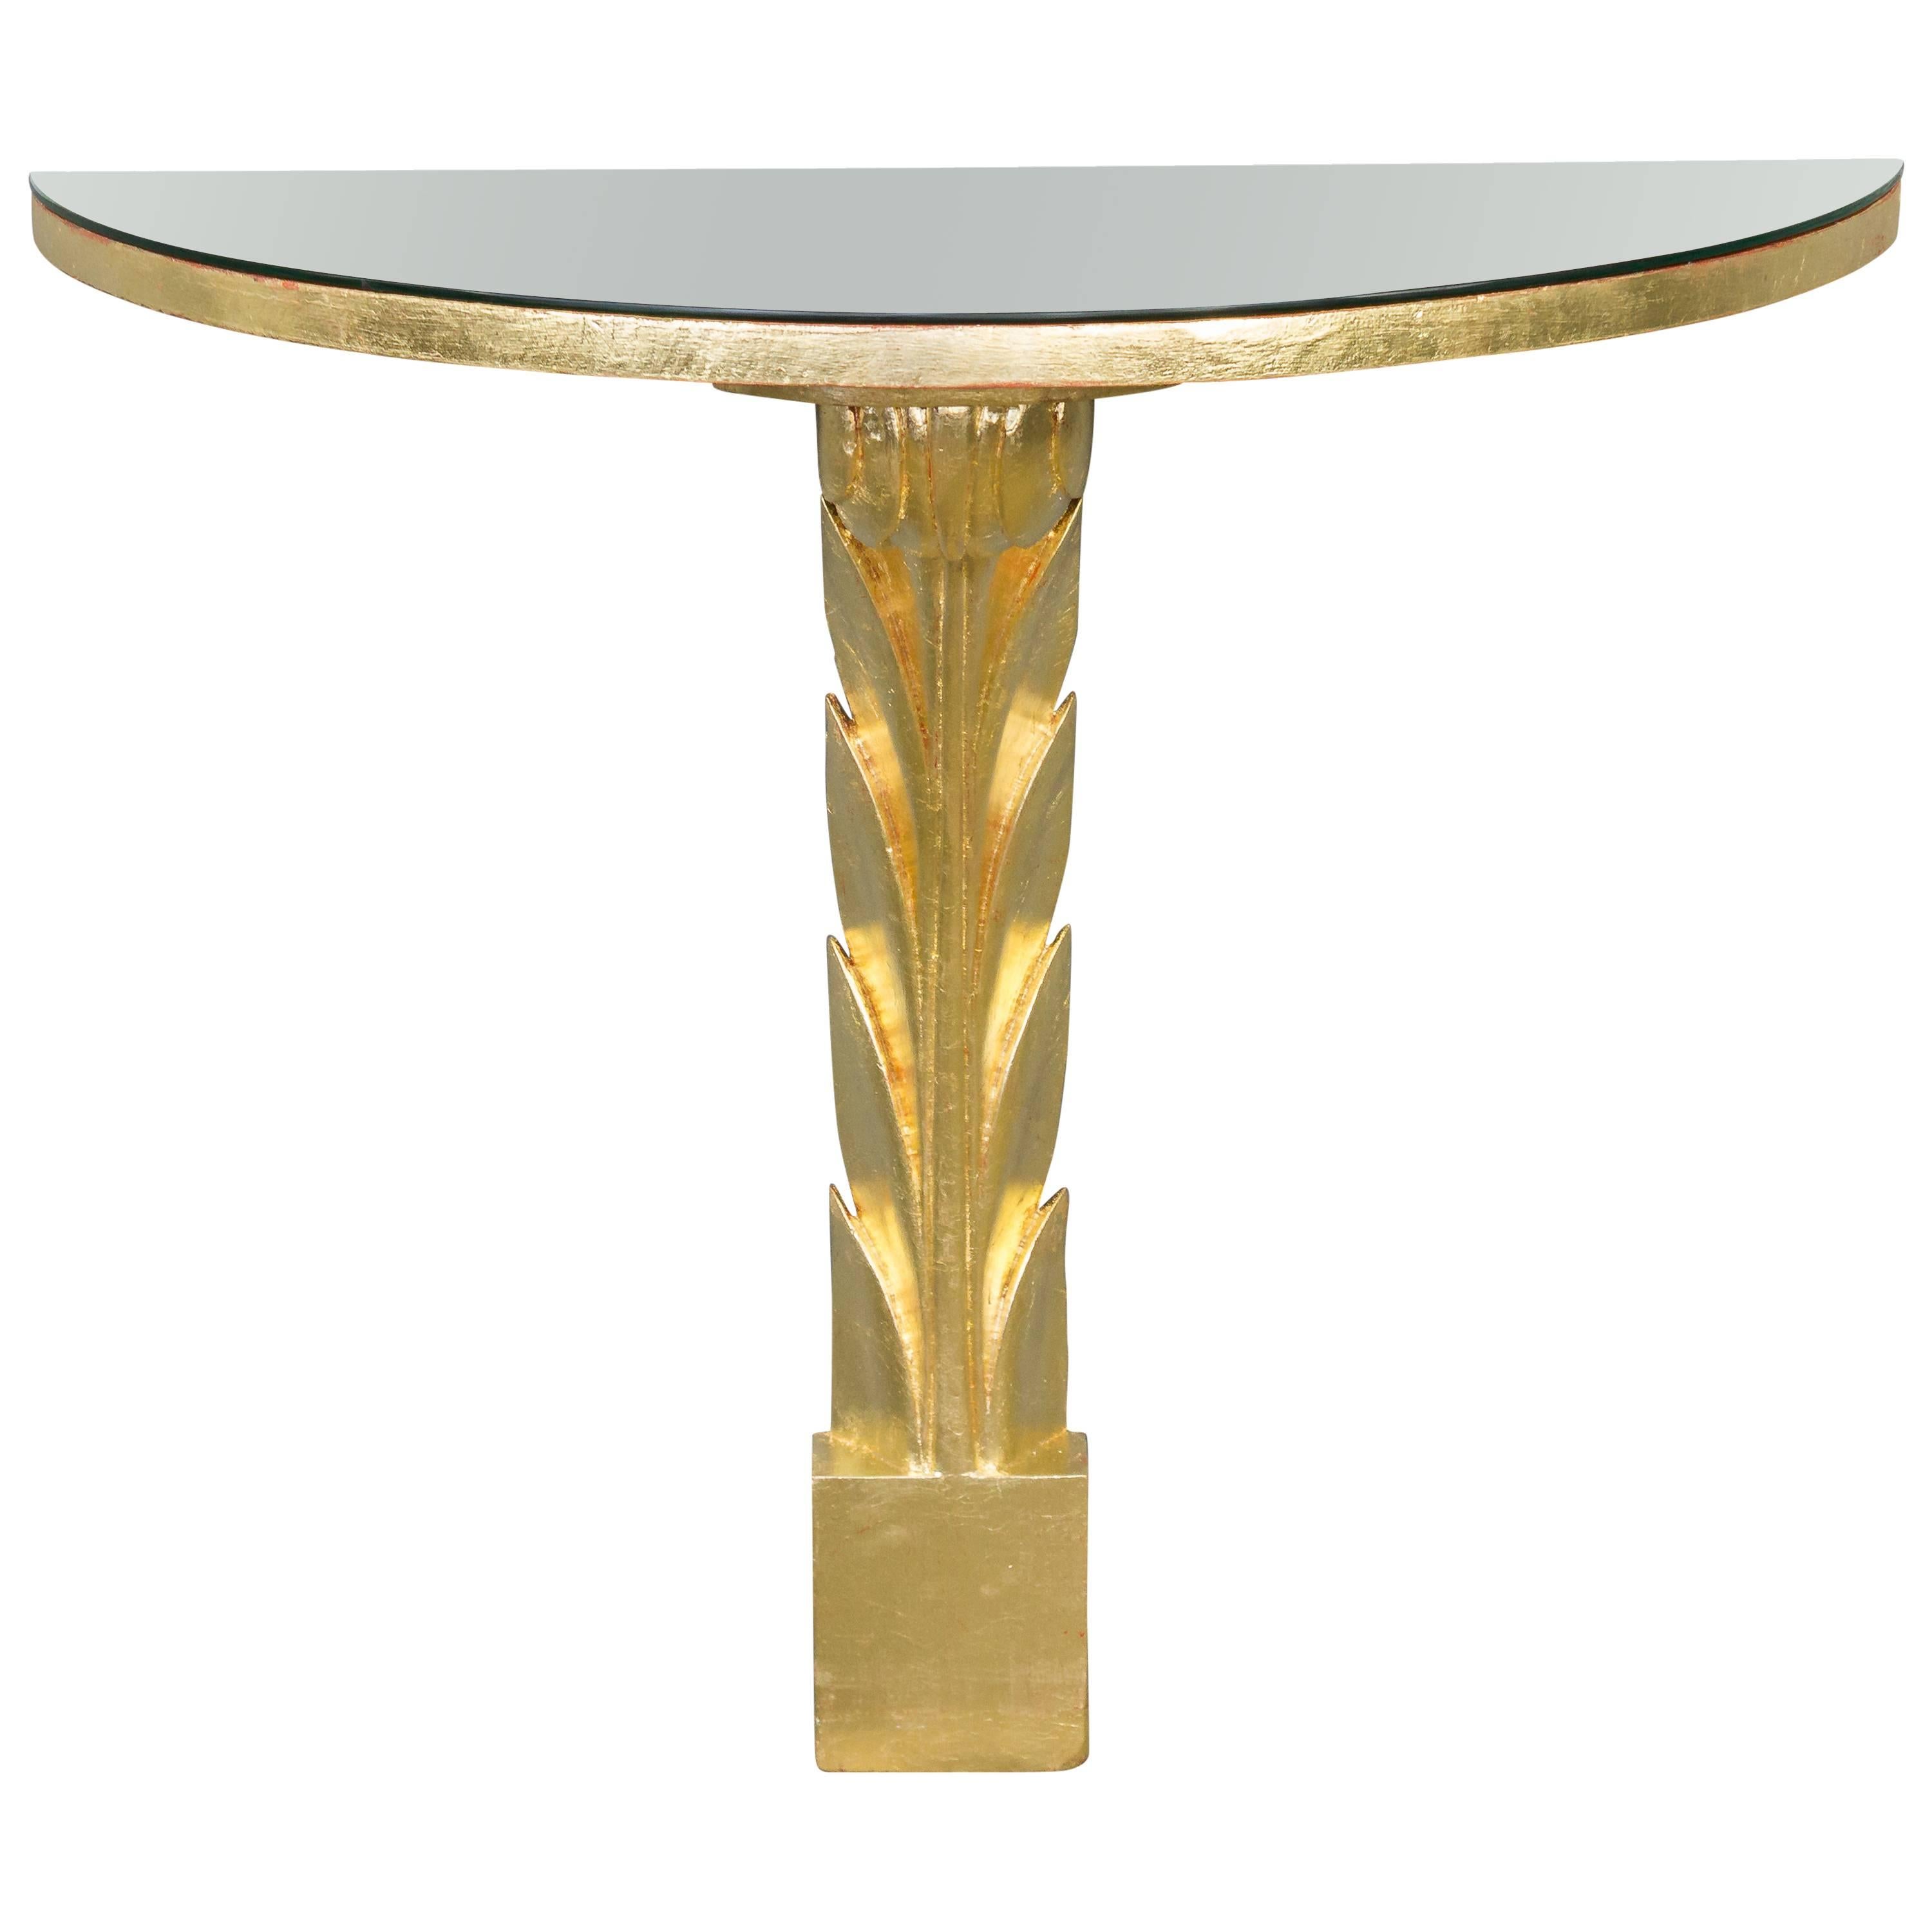 Giltwood Console Art Deco Style Console with Mirrored Top